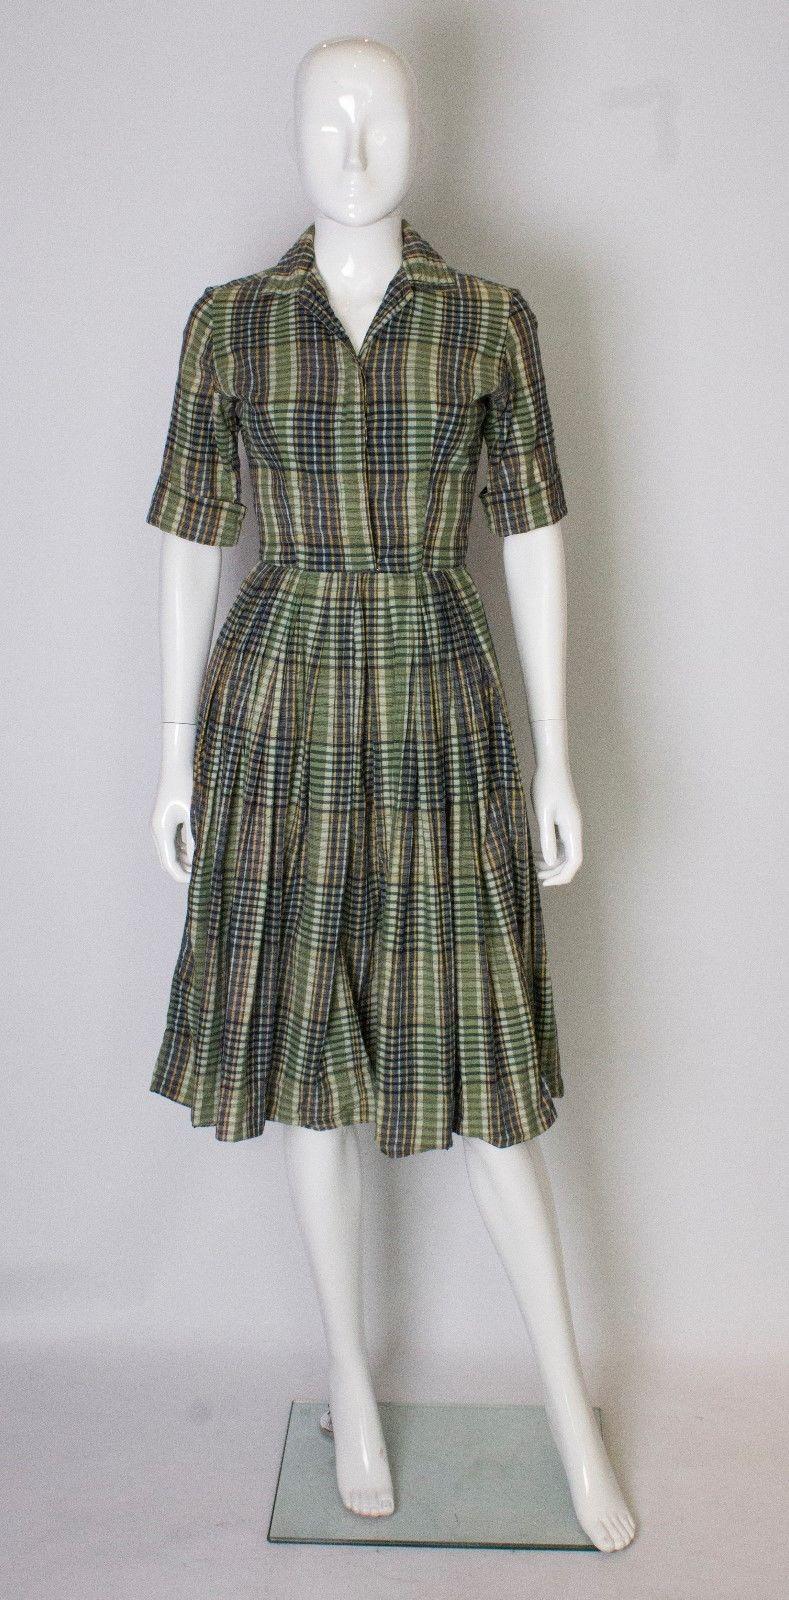 A vintage 1950s gingham striped cotton day dress with a button up front and hocks at the waist 

with a pleated skirt

label - by Neiman Marcus - imported Indian madras

measurements taken flat in inches 

bust -18
waist -12.5
length - 42
 
uk 6